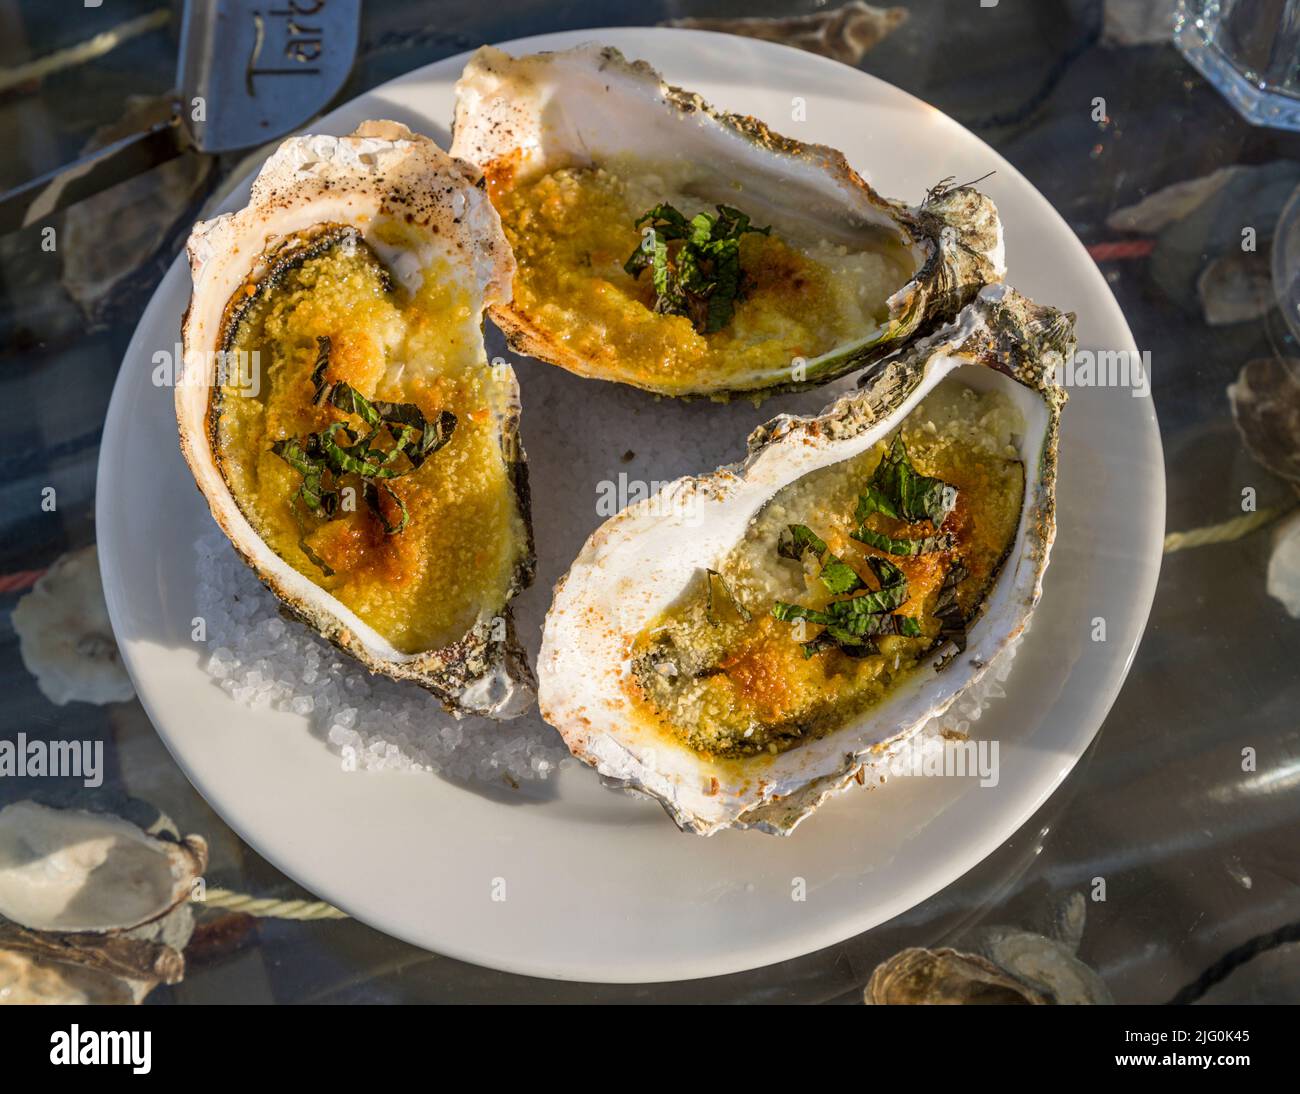 The oysters with thick shell and immaculate nacre are perfect for a gratin with bread crumbs, mint, verven oil, lemon and orange zest at the beach pavilion Le St Pierre Tarbouriech Stock Photo